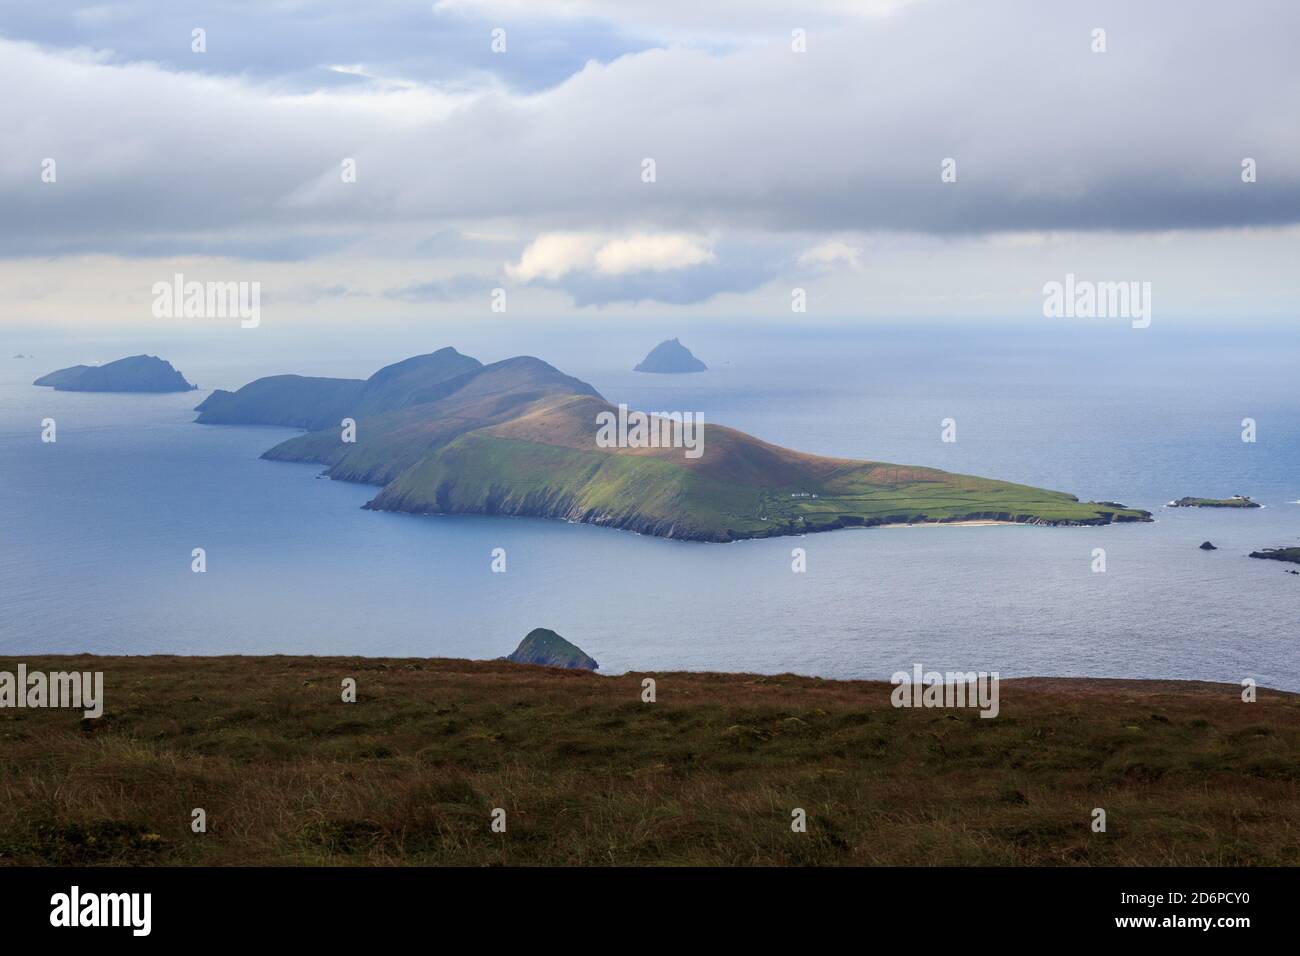 The Great Blasket Island viewed from Mount Eagle (Sliabh an Iolair) on the Dingle Peninsula along the Wild Atlantic Way in Ireland Stock Photo